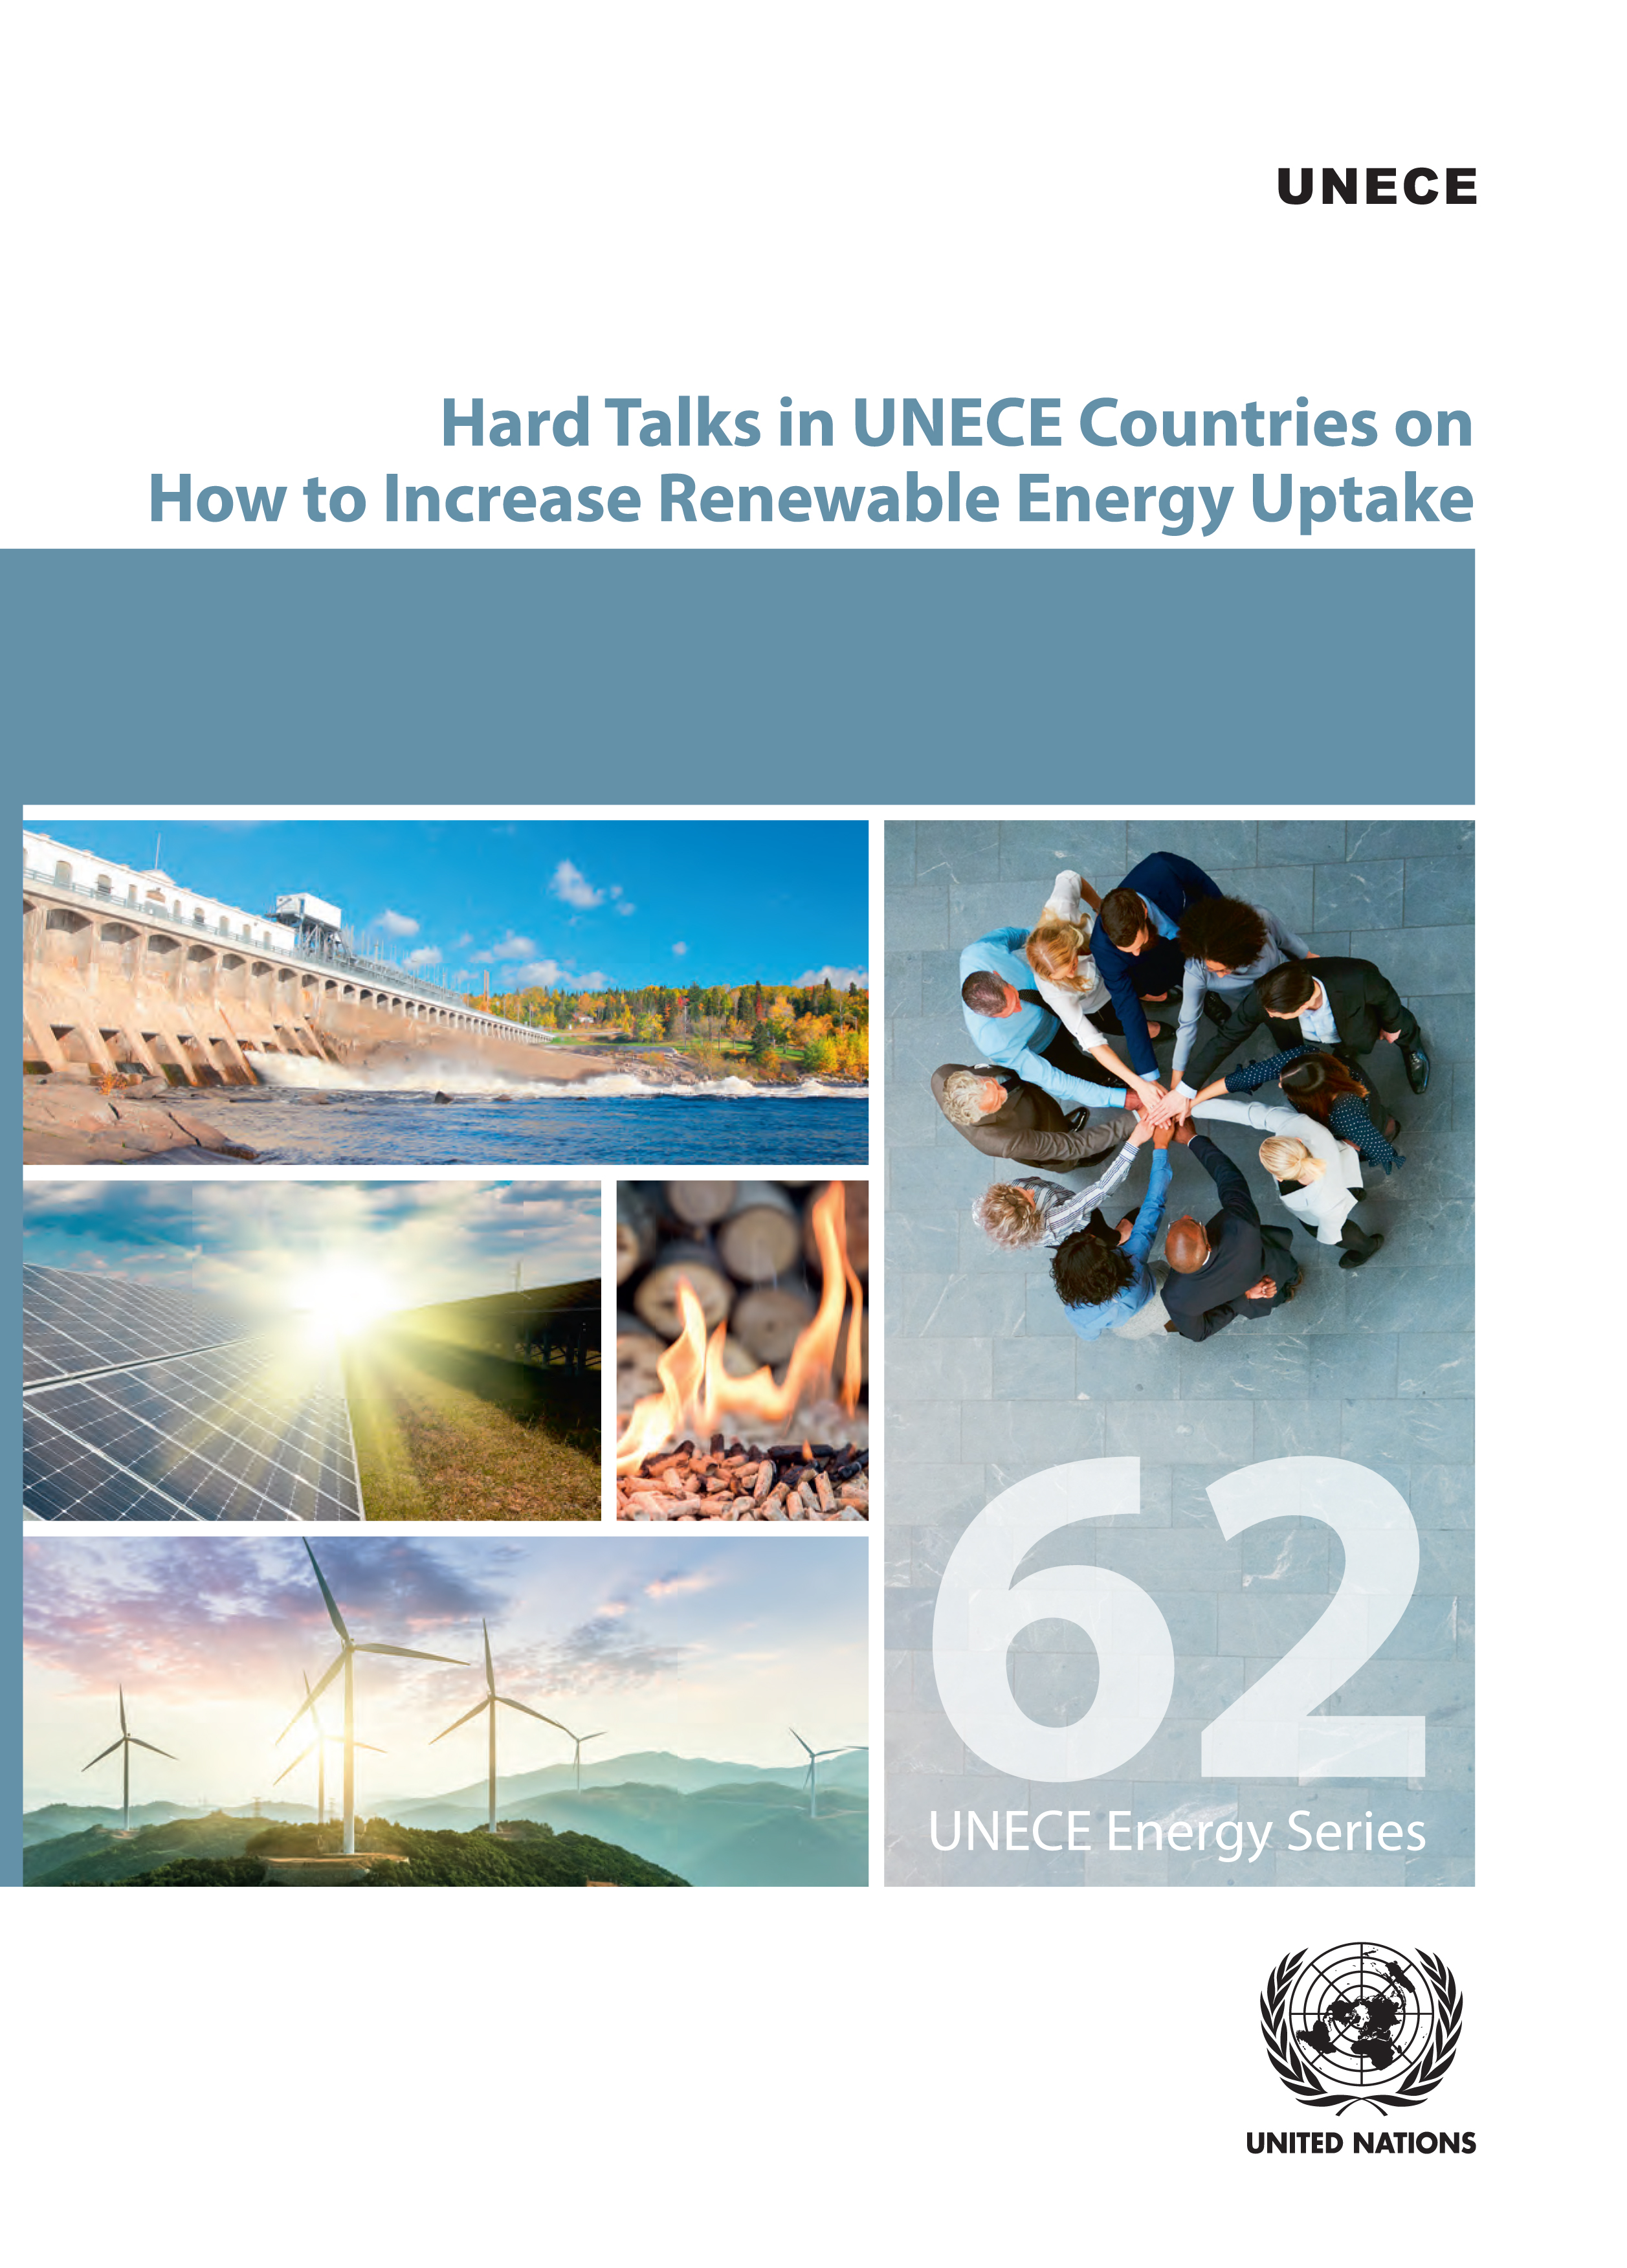 image of Renewable energy status of UNECE countries